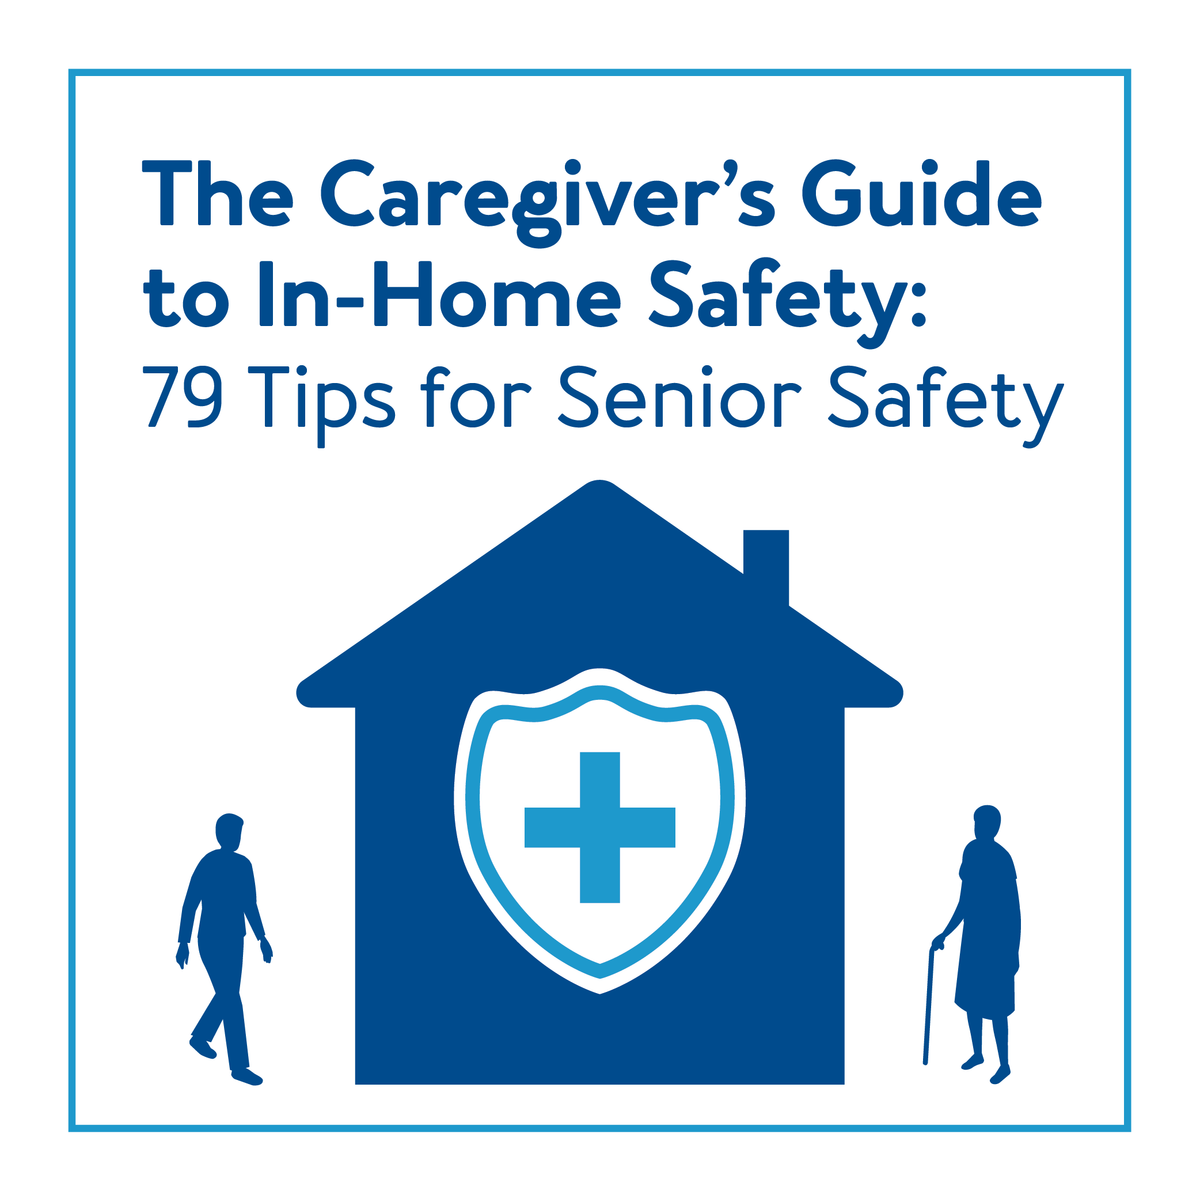 Home graphic with two outlines of people, text , The Caregiver’s Guide to In-Home Safety: 79 Tips for Senior Safety.